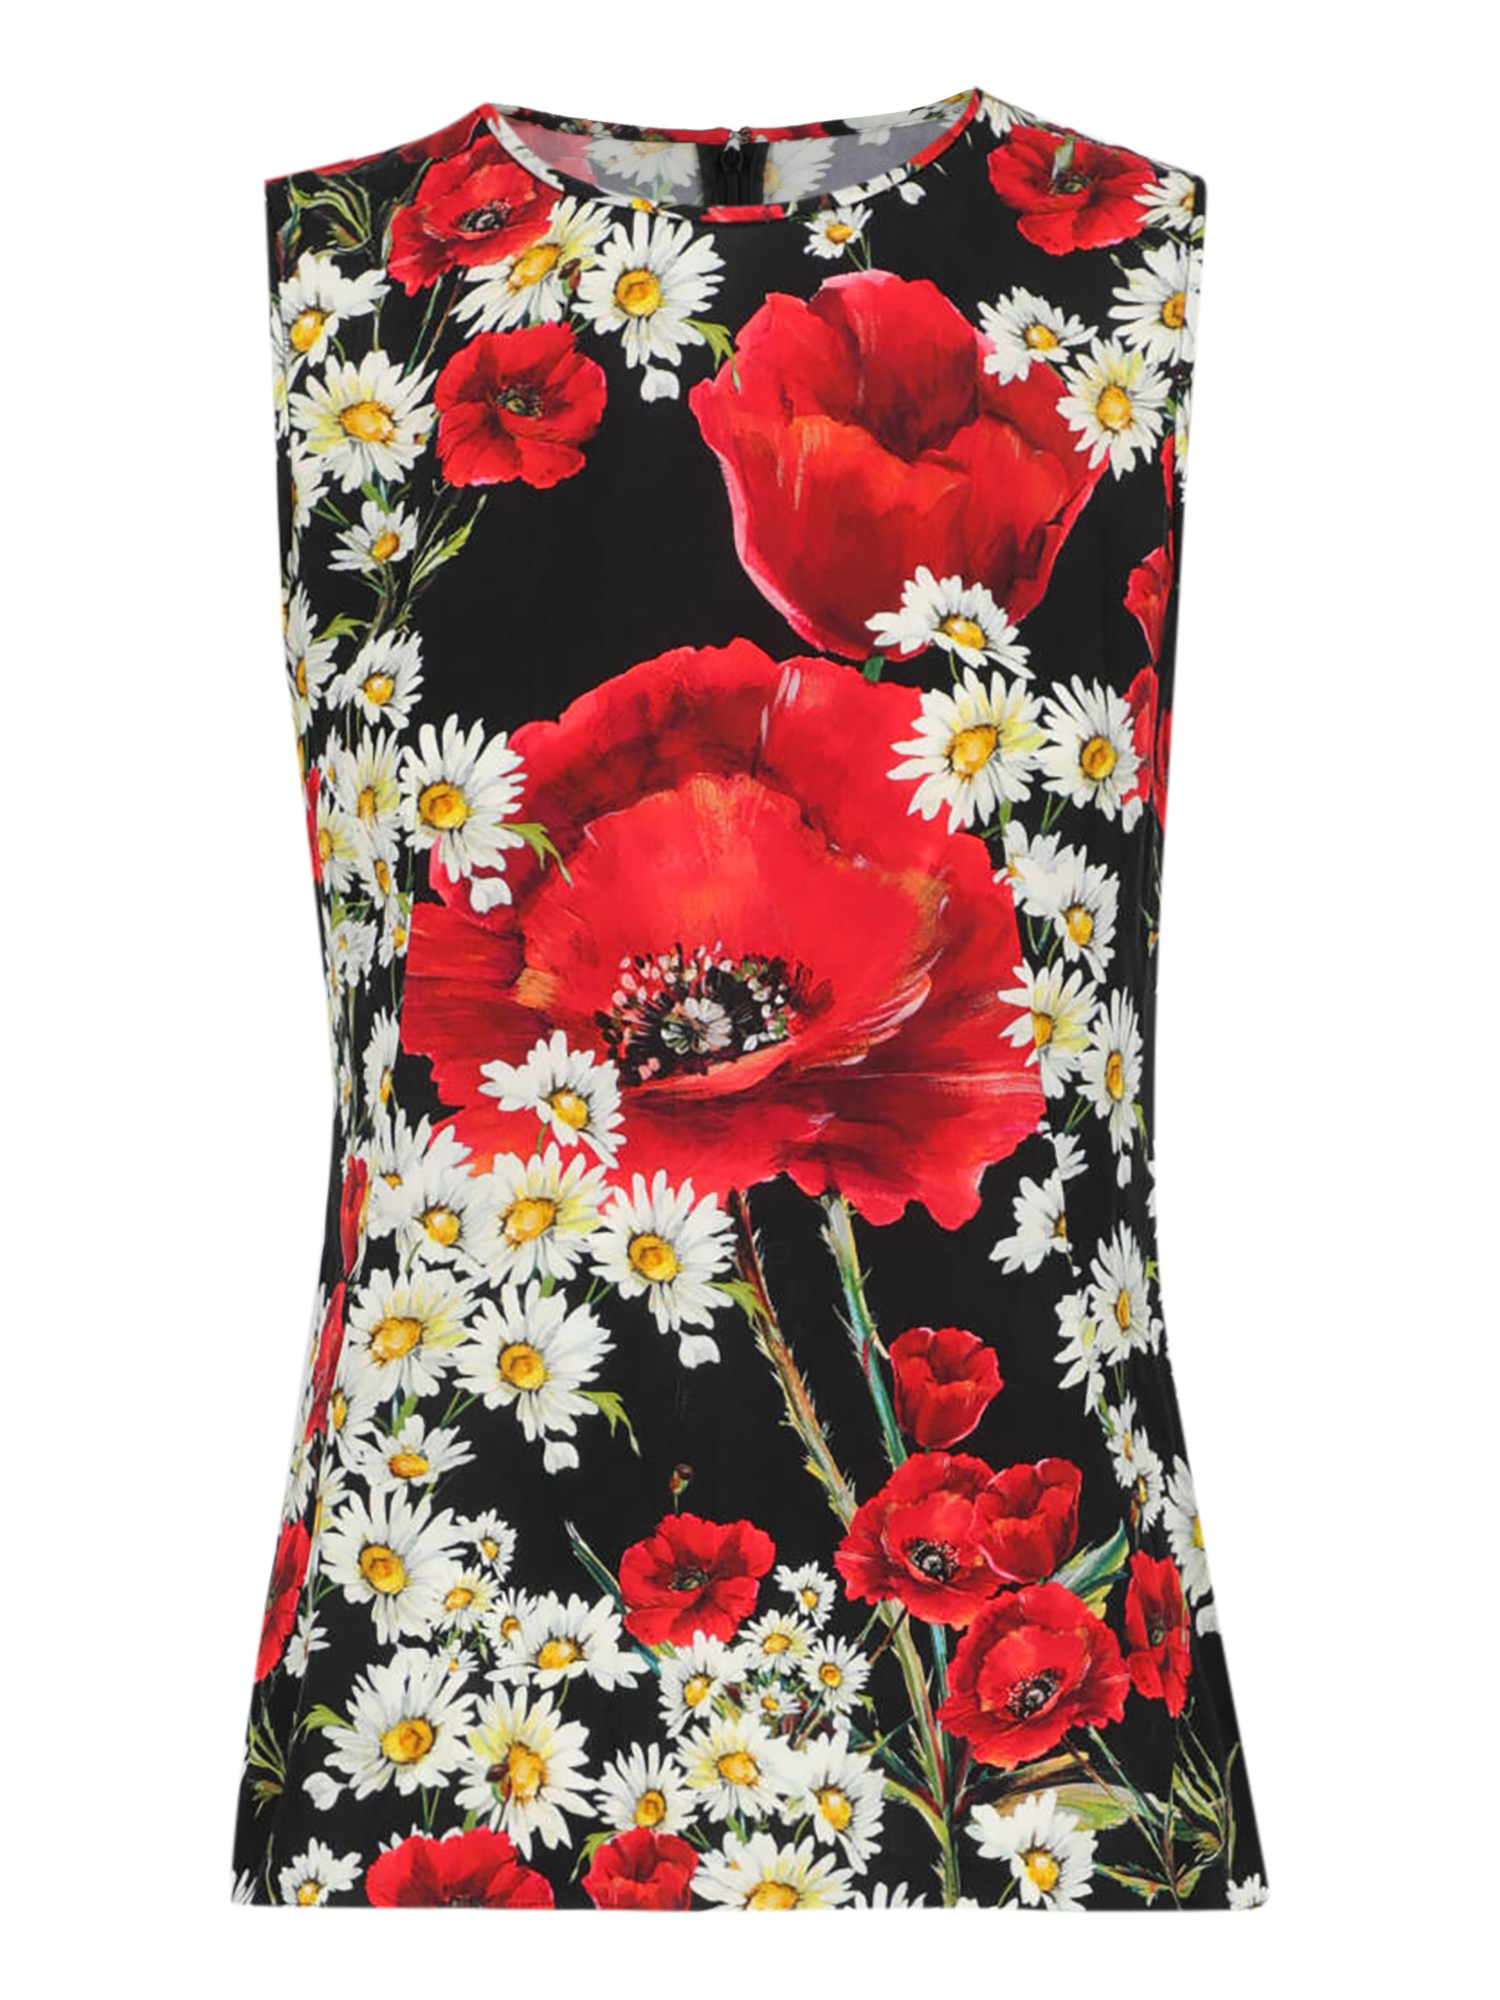 Condition: Very Good, Floral Print Silk, Color: Black, Red - M - IT 42 -